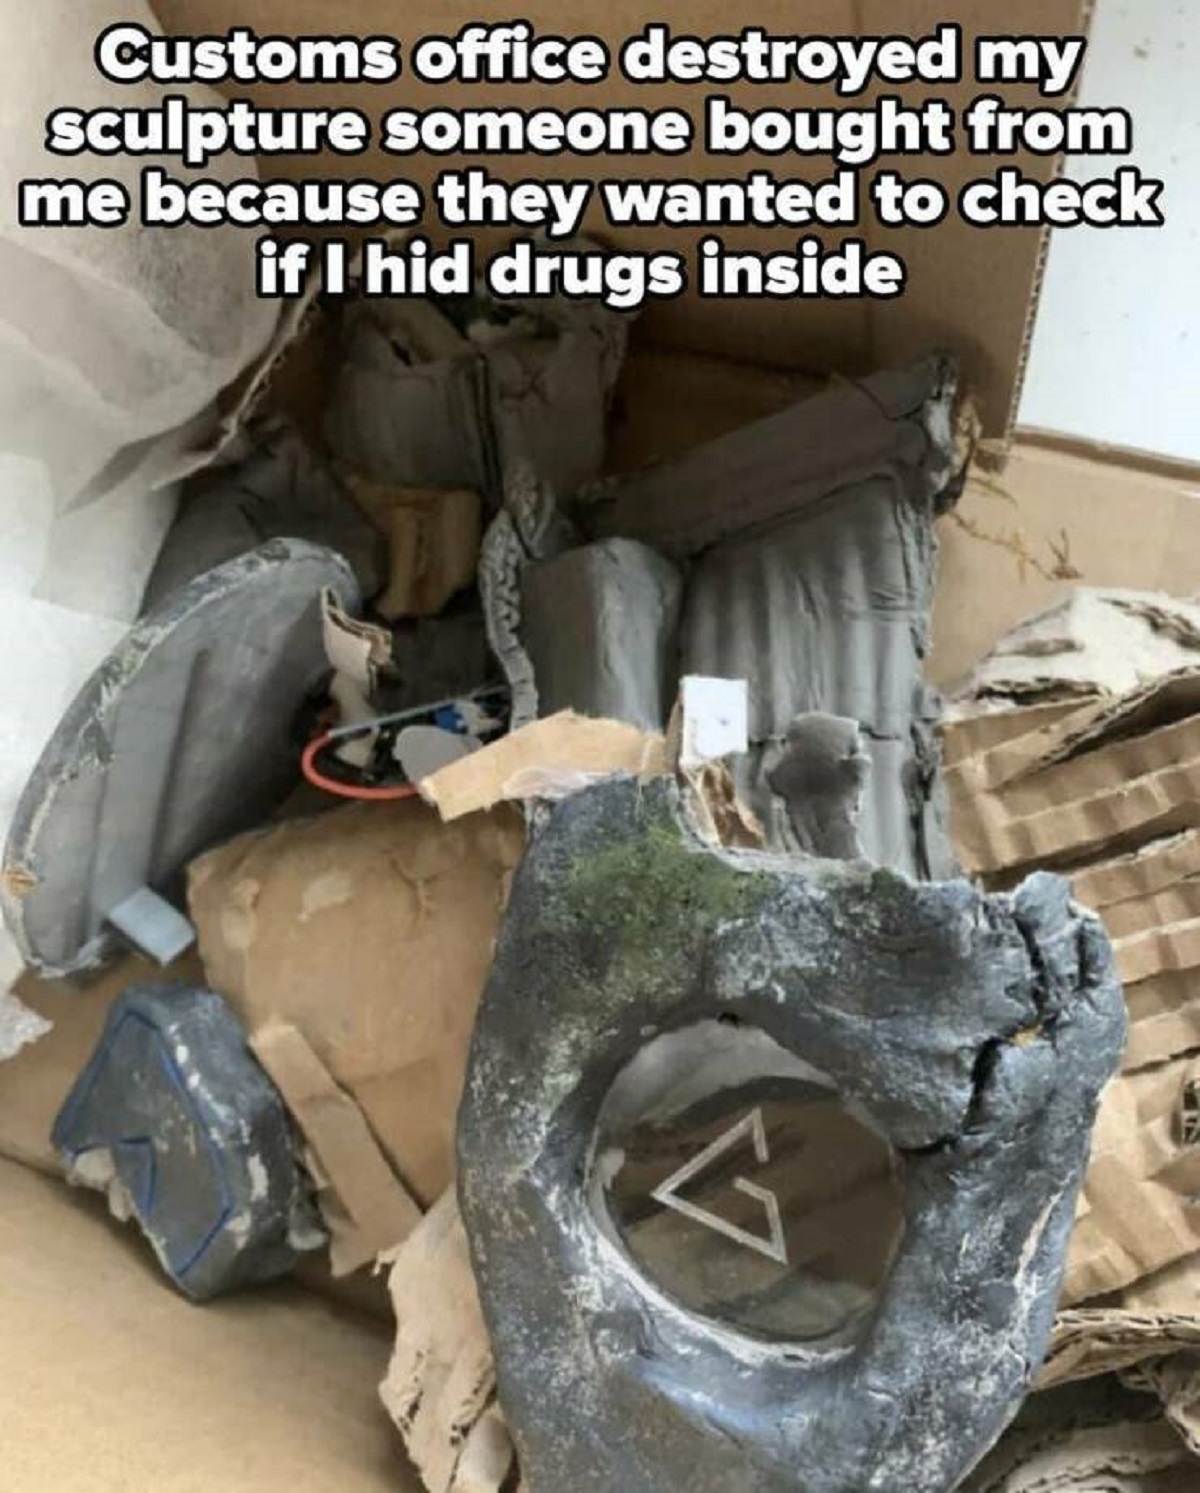 photo caption - Customs office destroyed my sculpture someone bought from me because they wanted to check if I hid drugs inside V